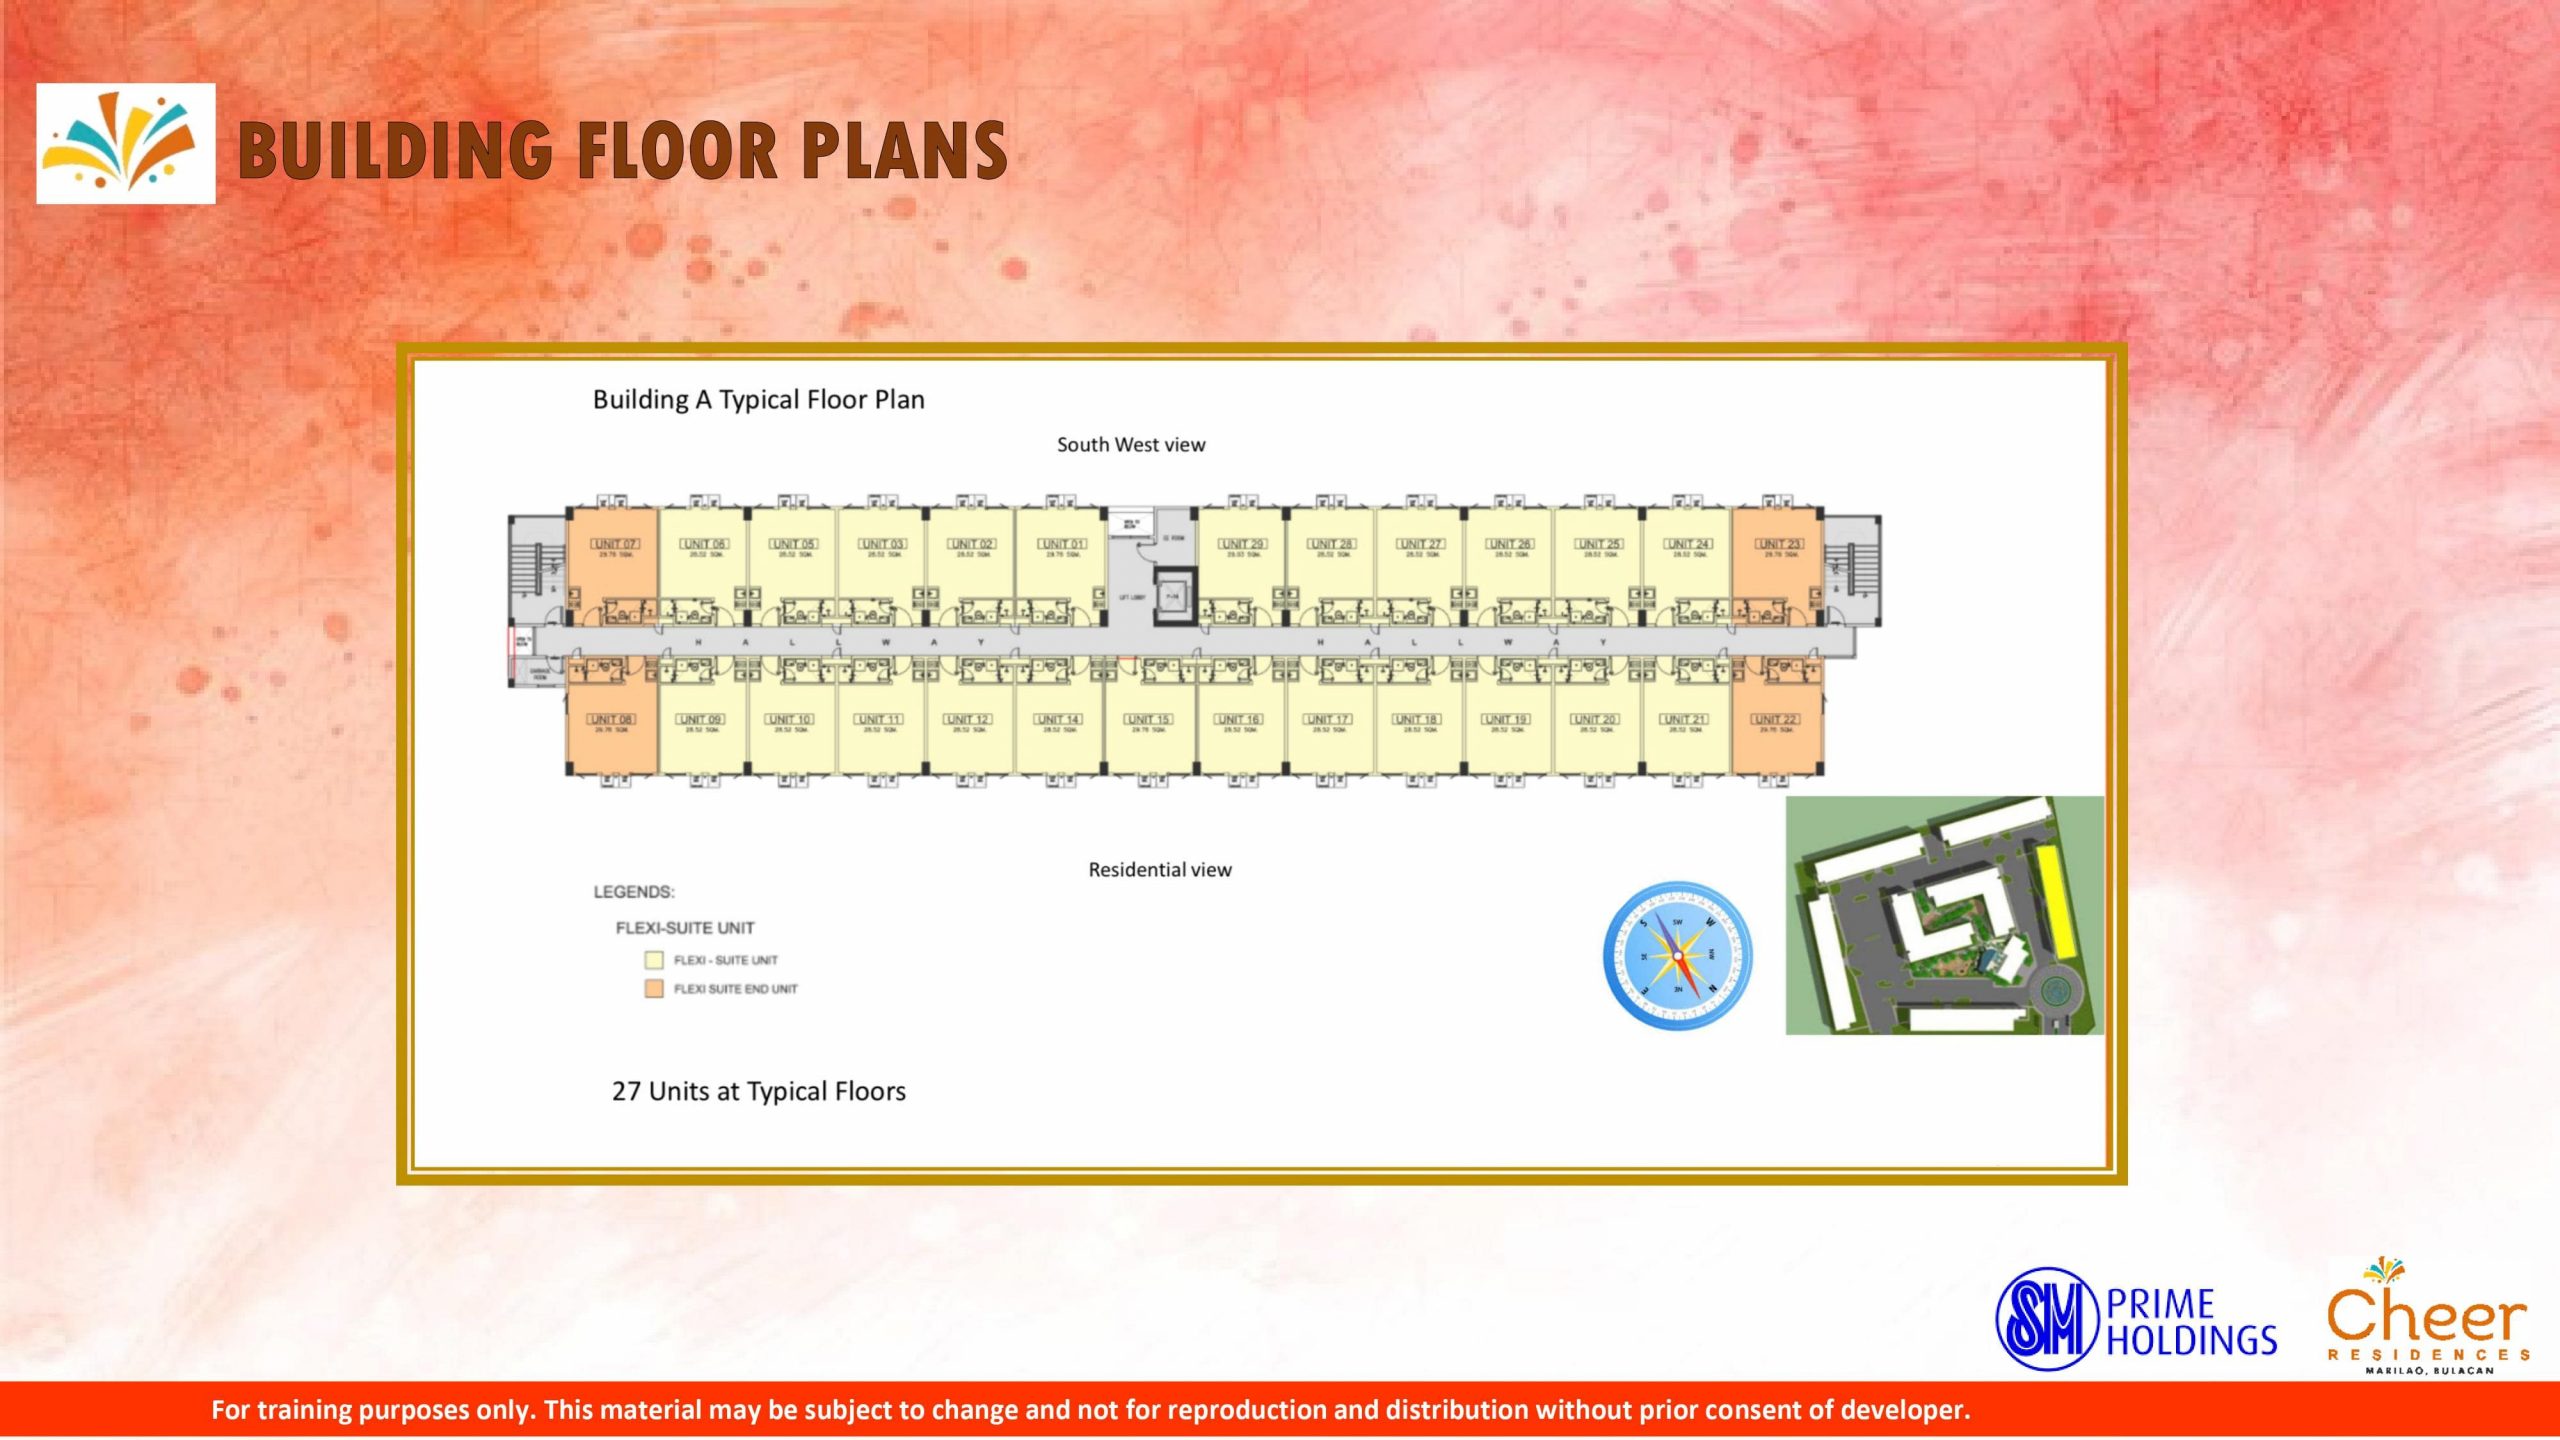 Building A Typical Floor Plan